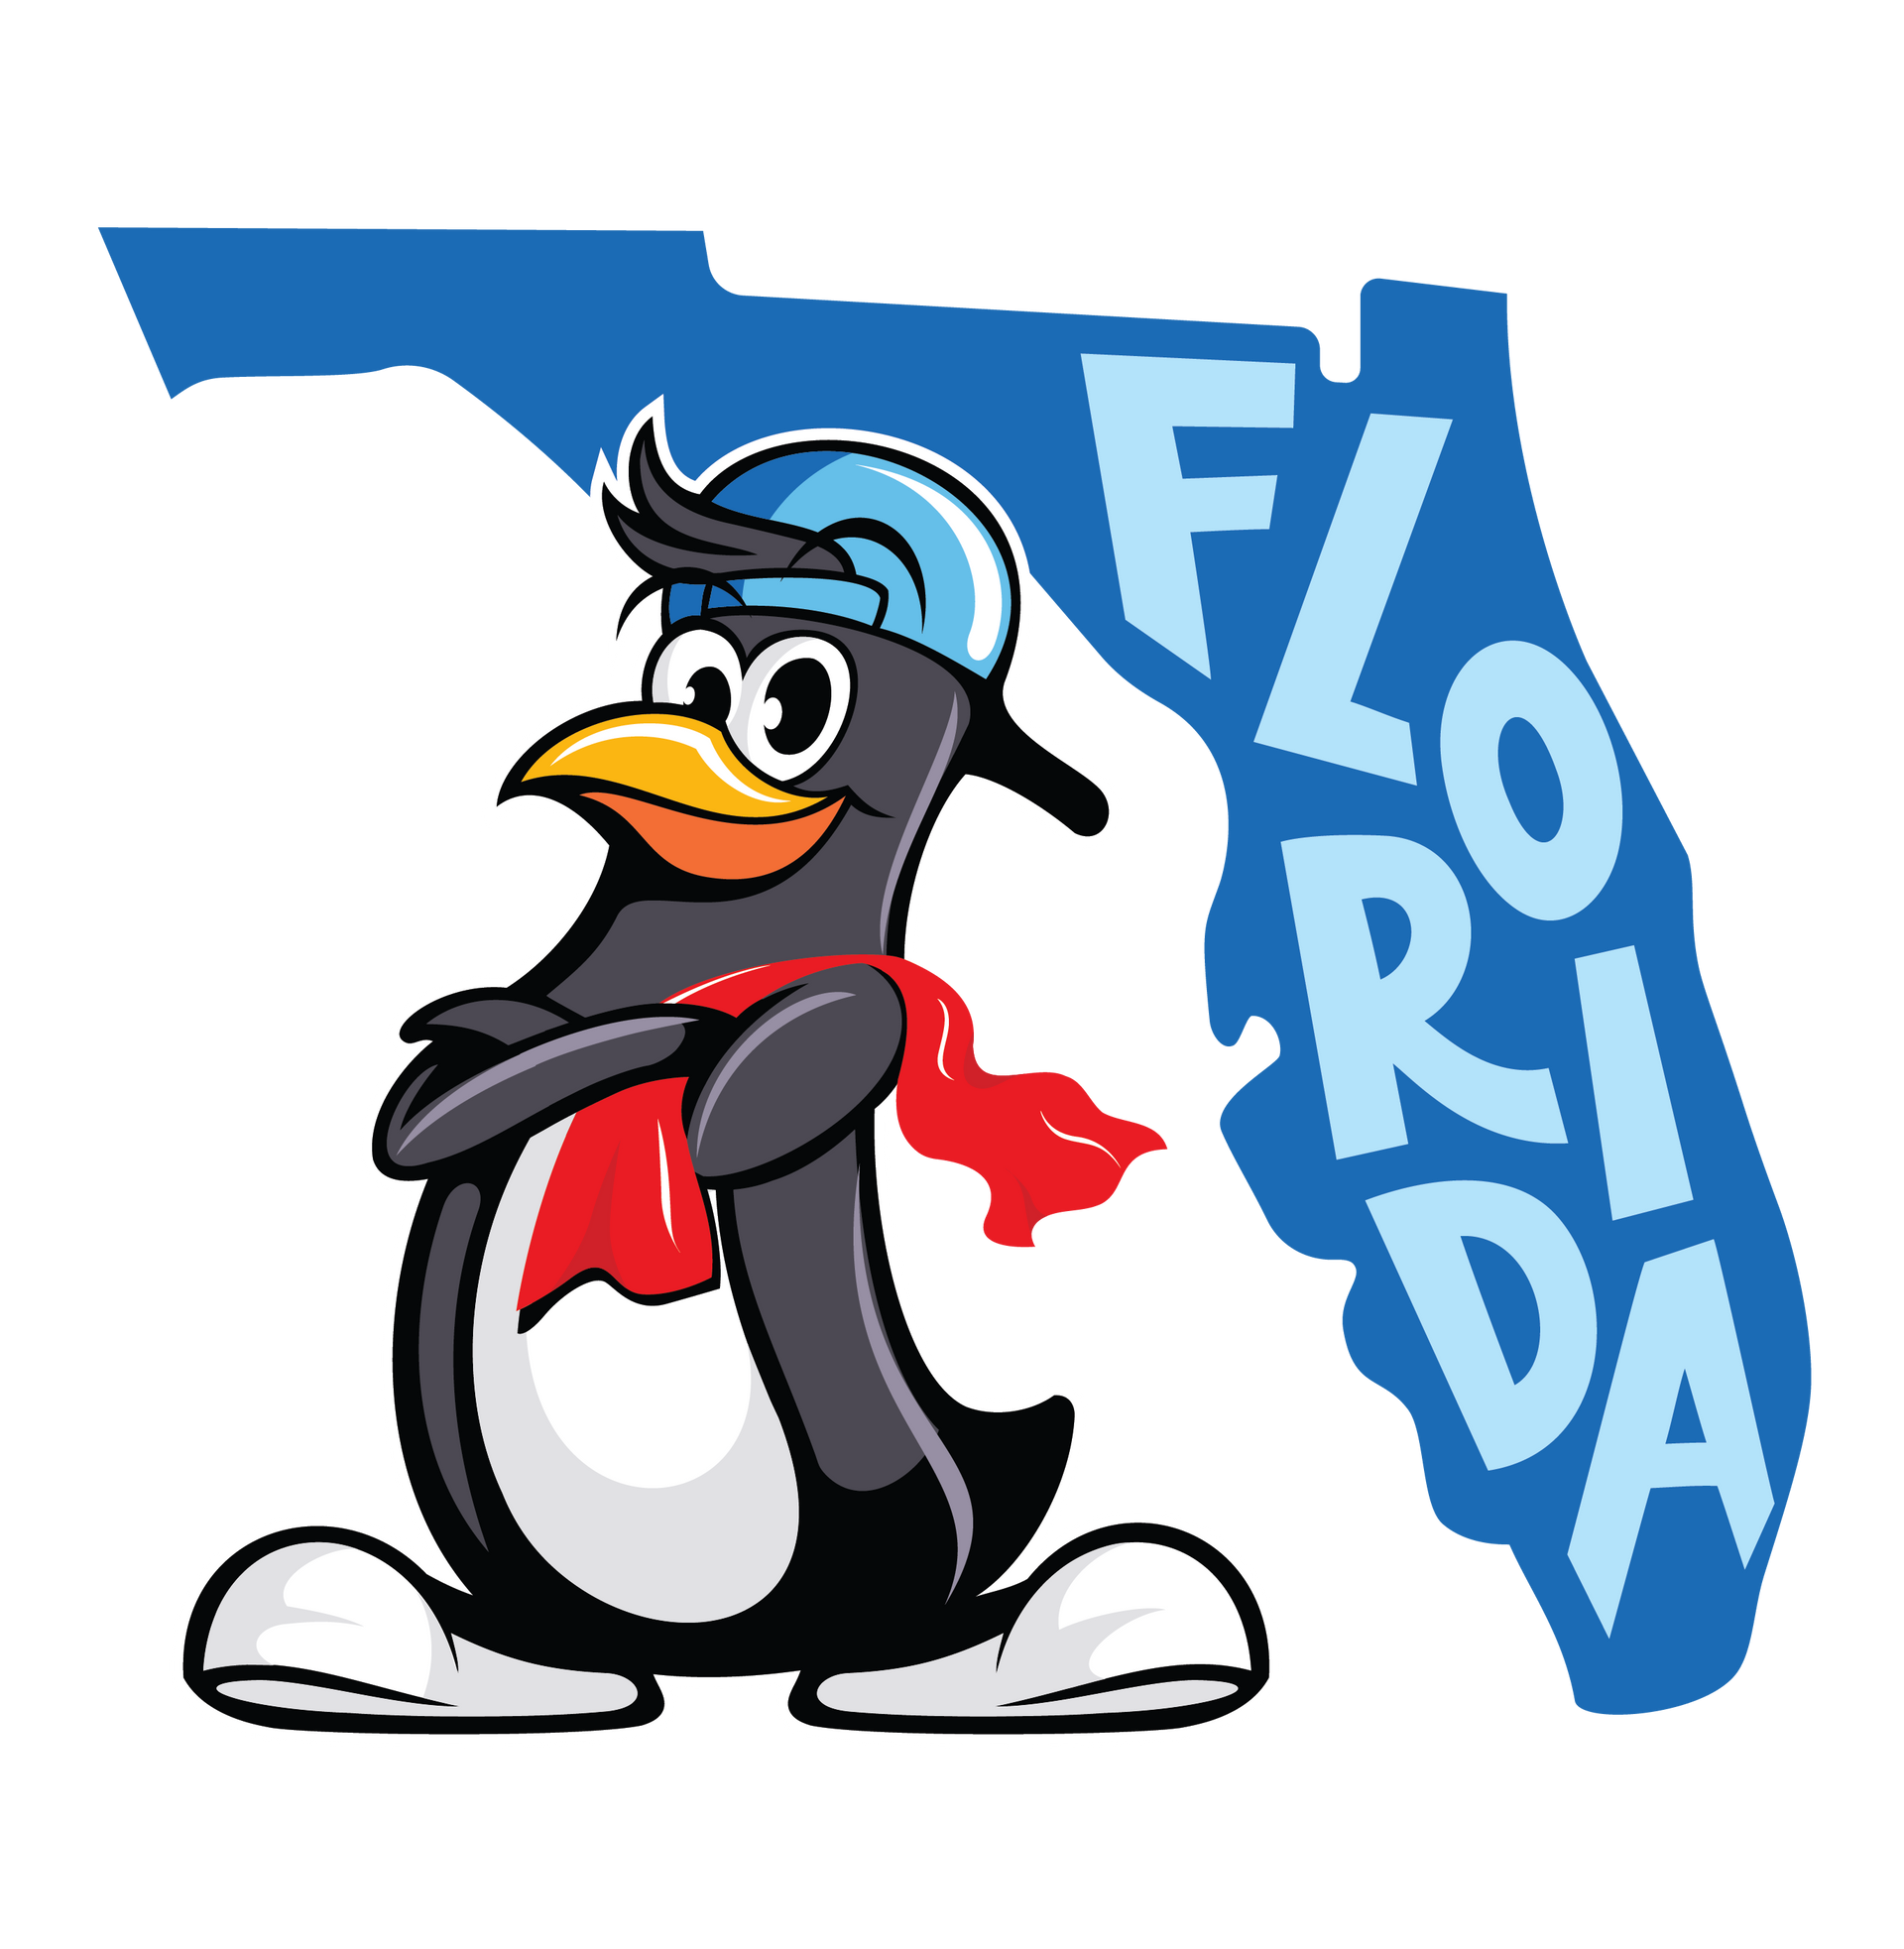 The state of Florida with Blue Penguin's mascot behind it.